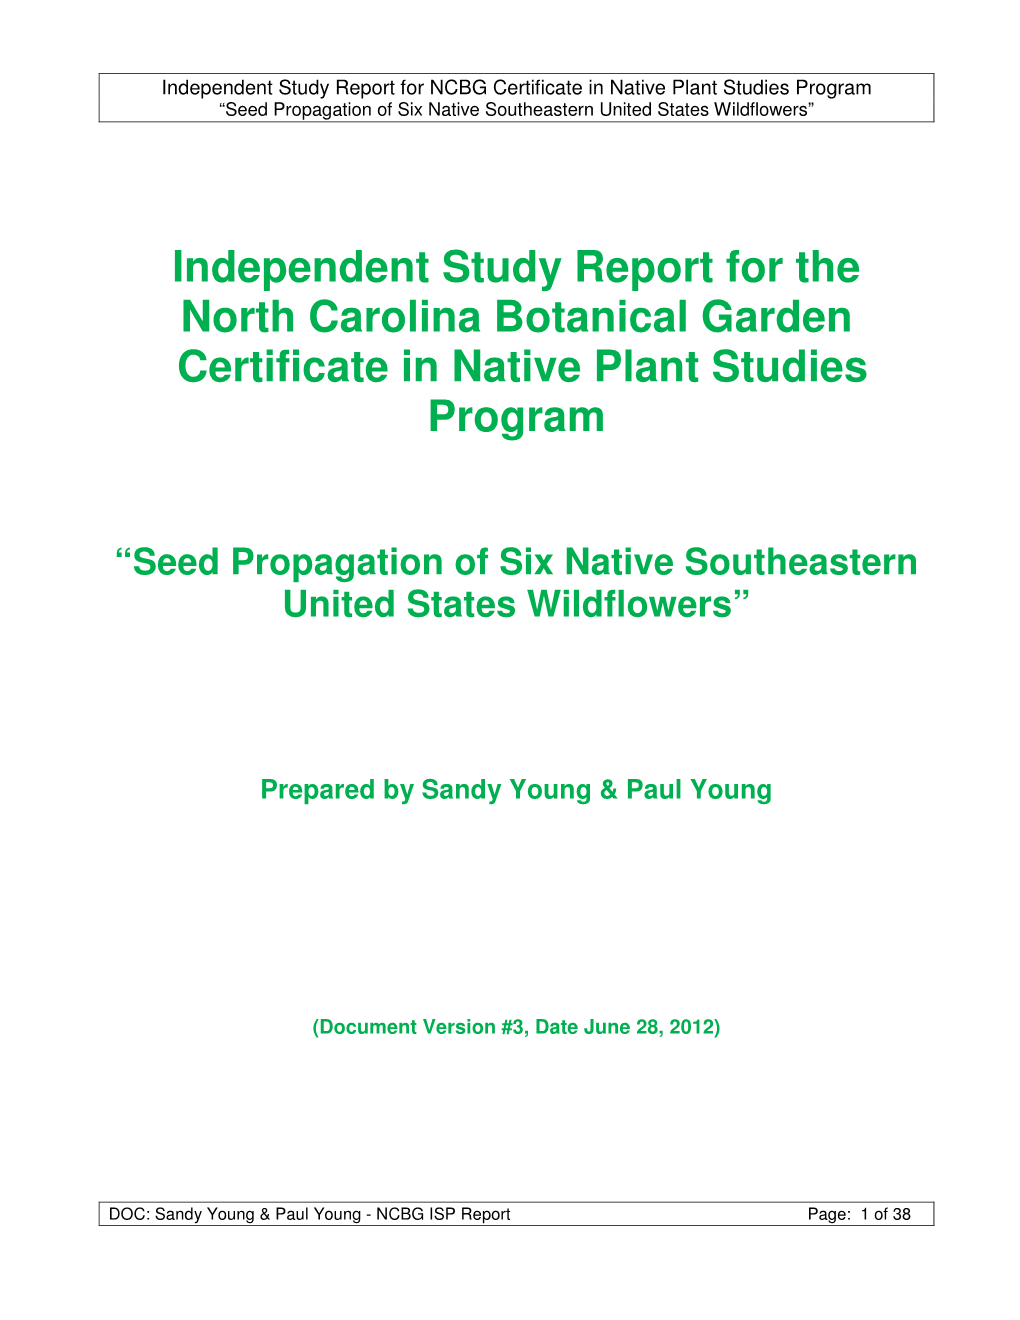 Independent Study Report for the North Carolina Botanical Garden Certificate in Native Plant Studies Program